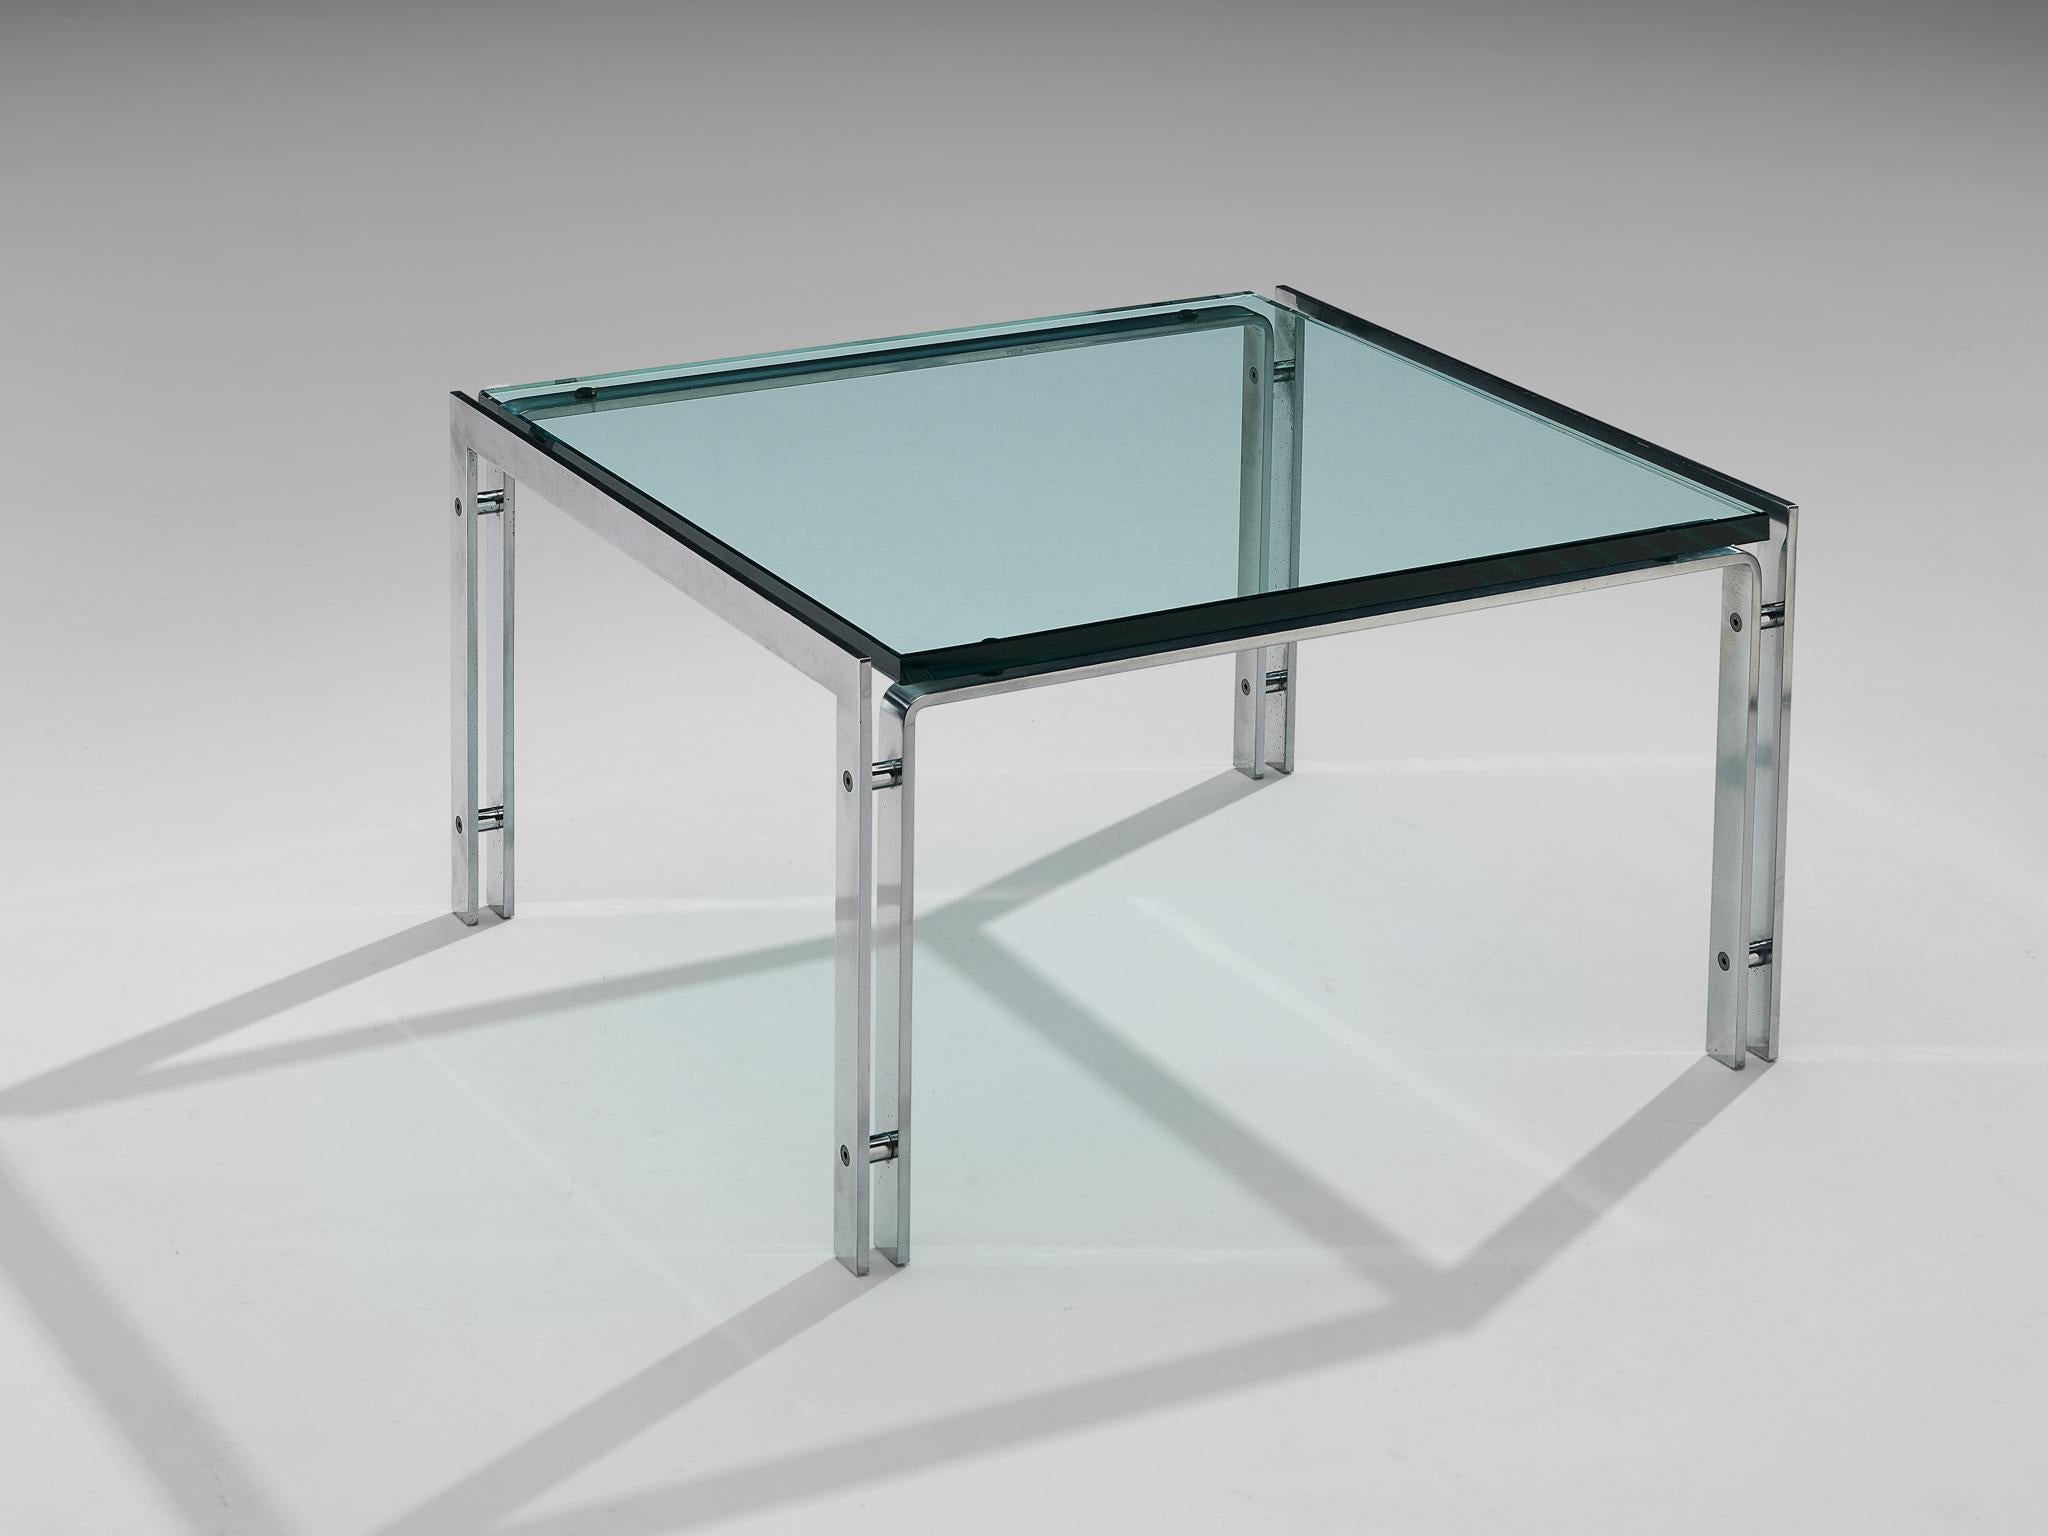 Coffee table, steel and glass, The Netherlands, 1970s

Modernist coffee table in chrome plated steel and glass. This design displays sober and straight forward characteristics due the combination of materials and the design of the legs. The table